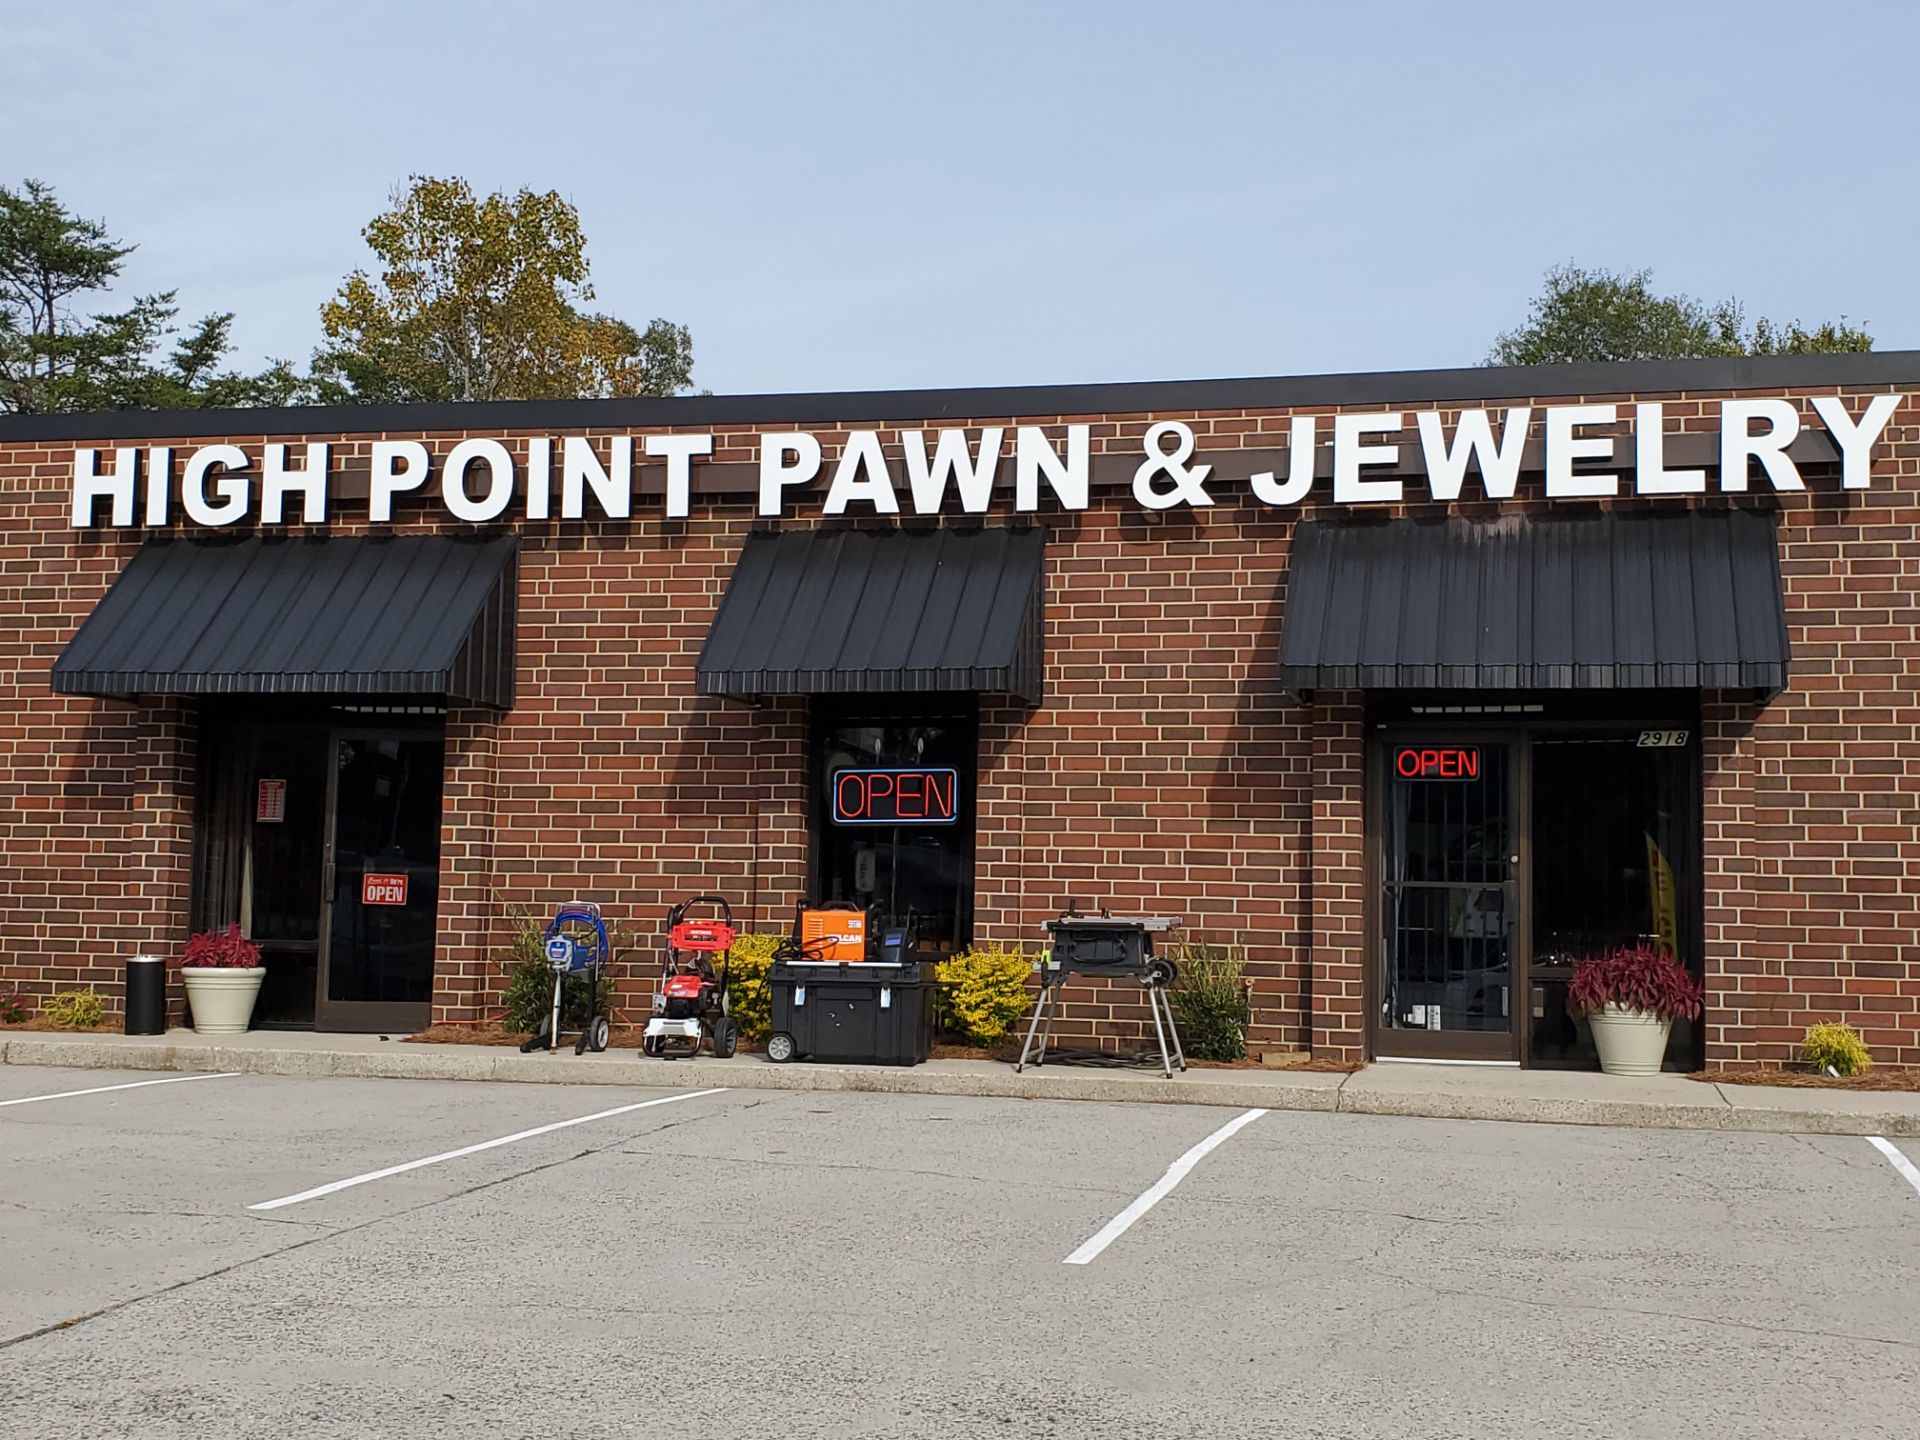 West Green Pawn